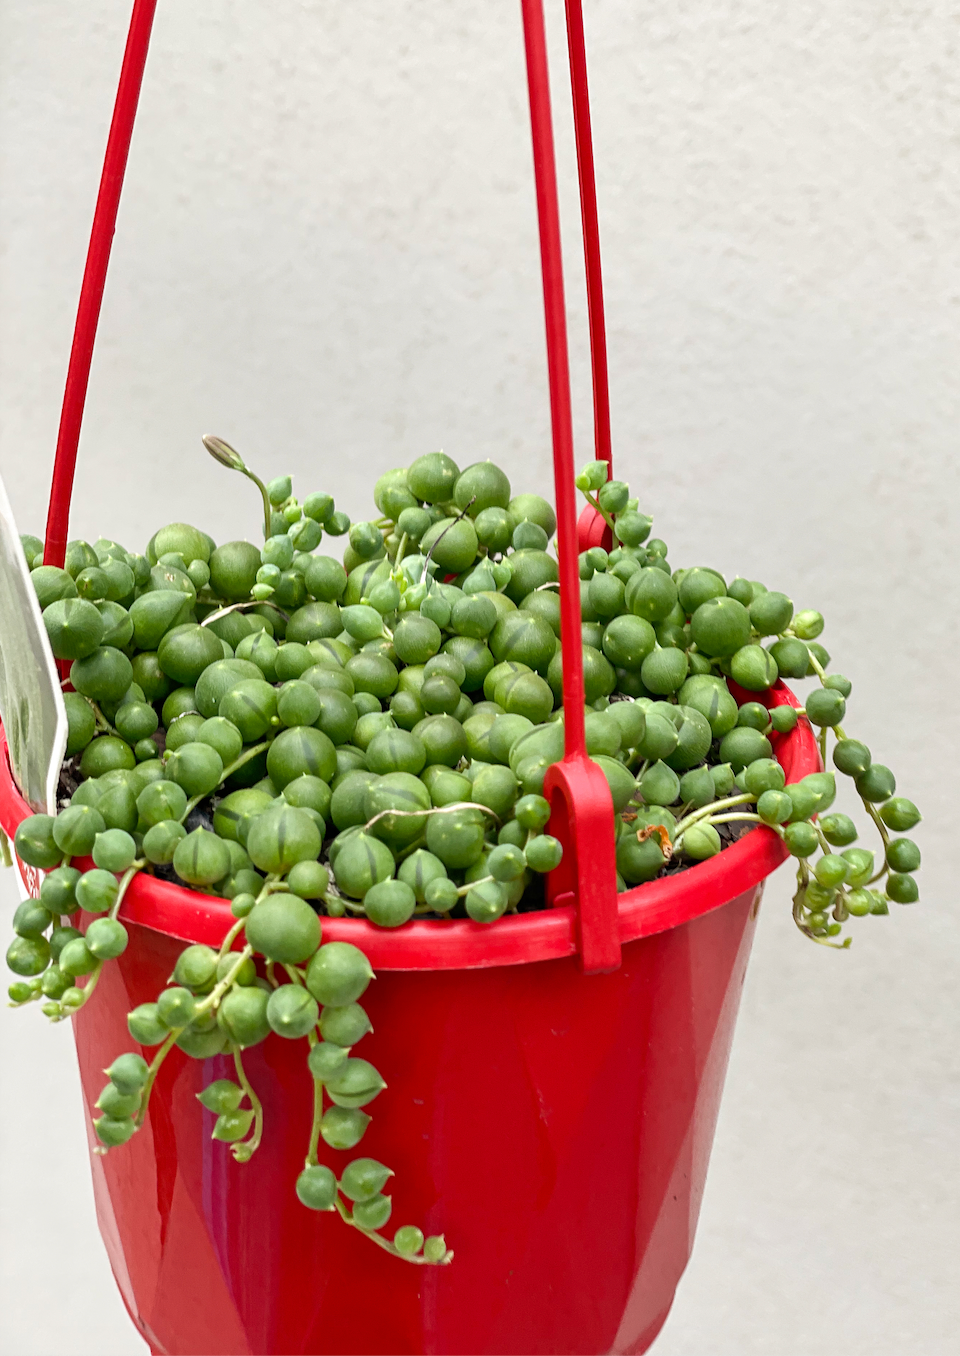 String of Pearls, String of Pearls Brisbane, String of Pearls for sale Brisbane south,  indoor plants Brisbane, indoor plants Brisbane southside, brisbane indoor plants, potted plants Brisbane southside, plant small business near me, buy indoor plants online Brisbane, indoor plants brisbane for sale, buy indoor plants online Brisbane southside, buy indoor plants Brisbane southside,